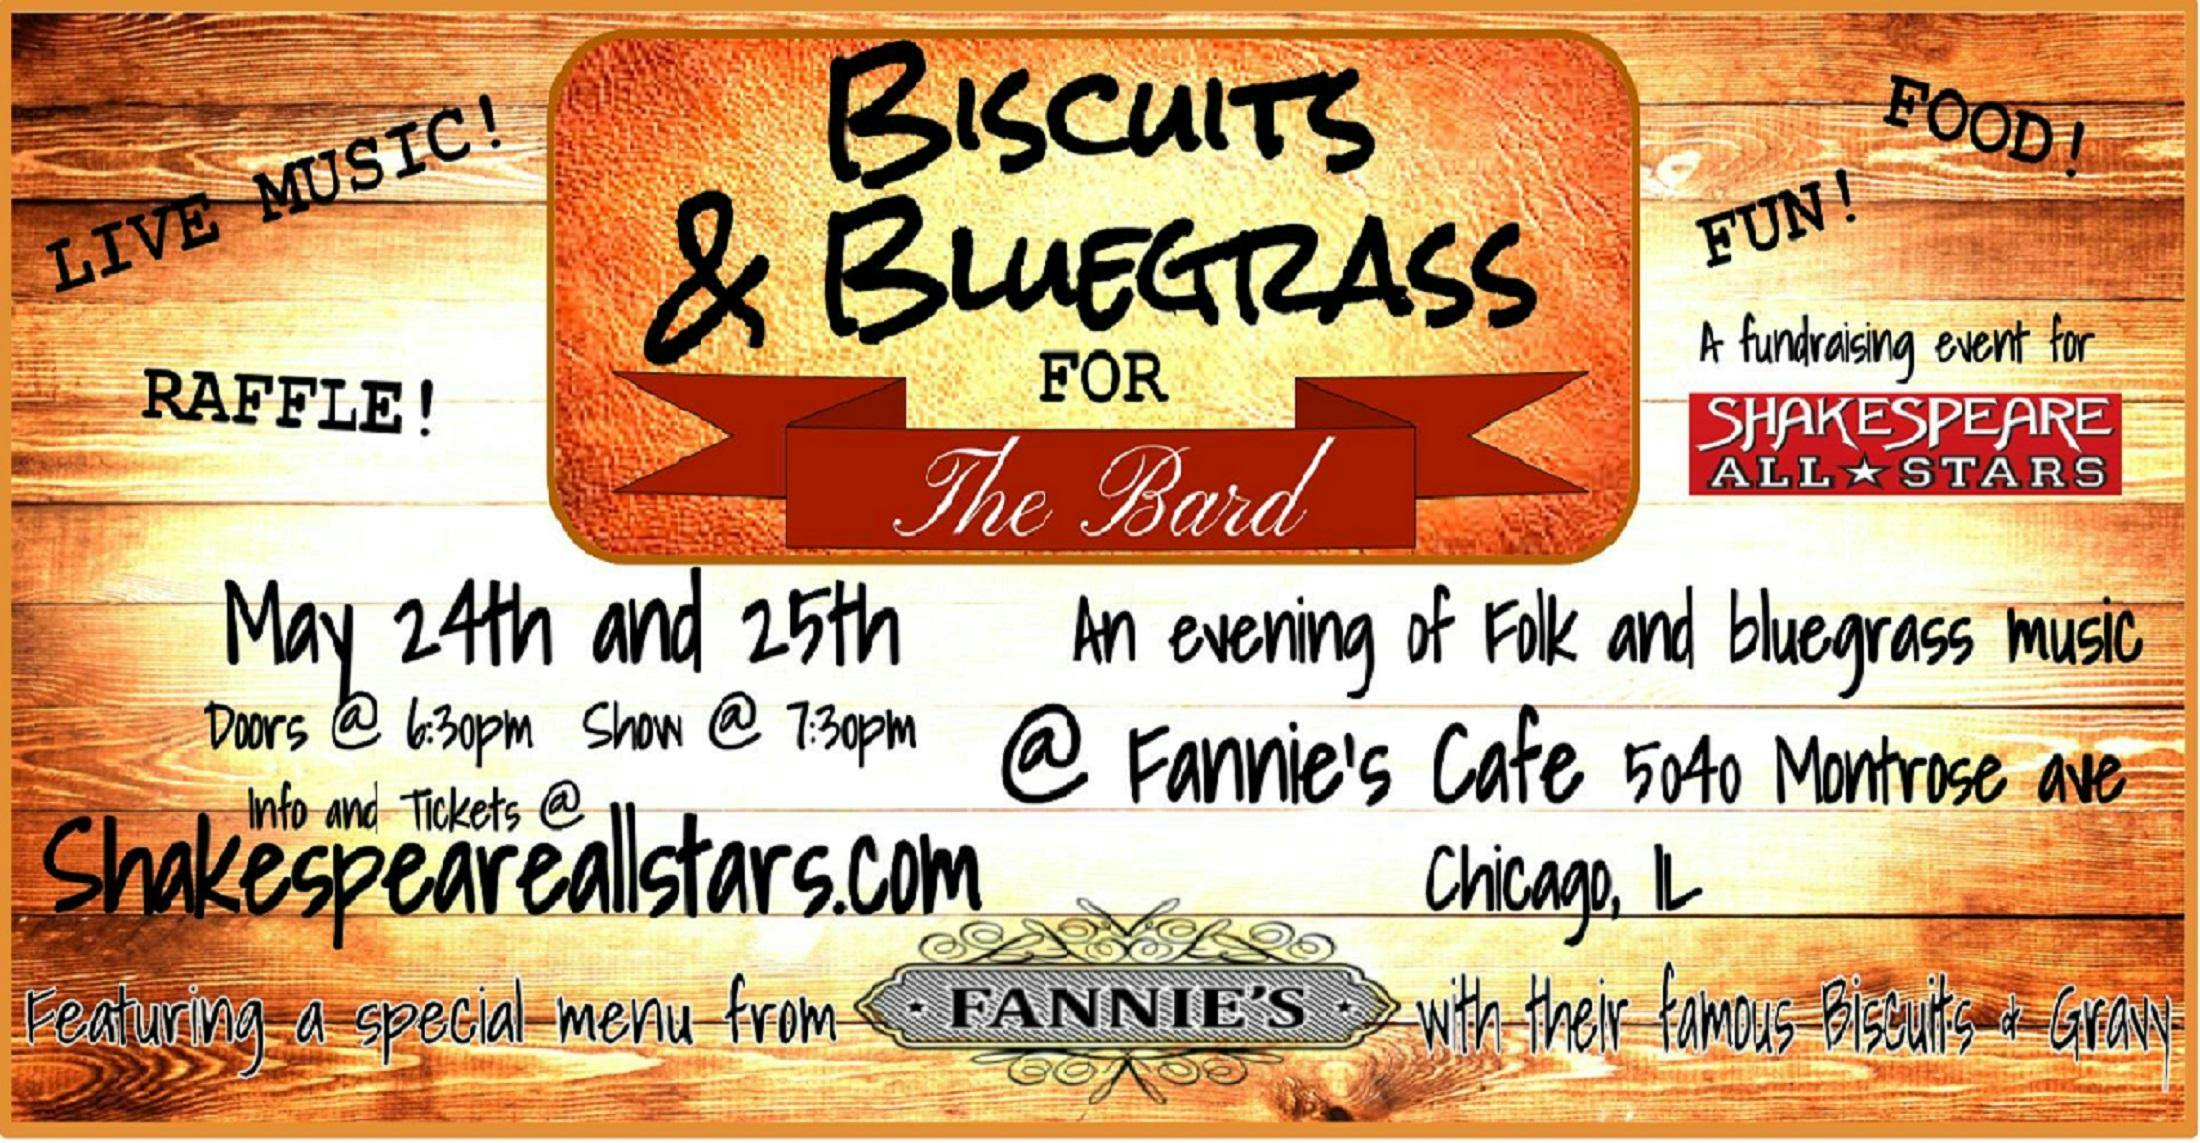 Biscuits and Bluegrass for the Bard